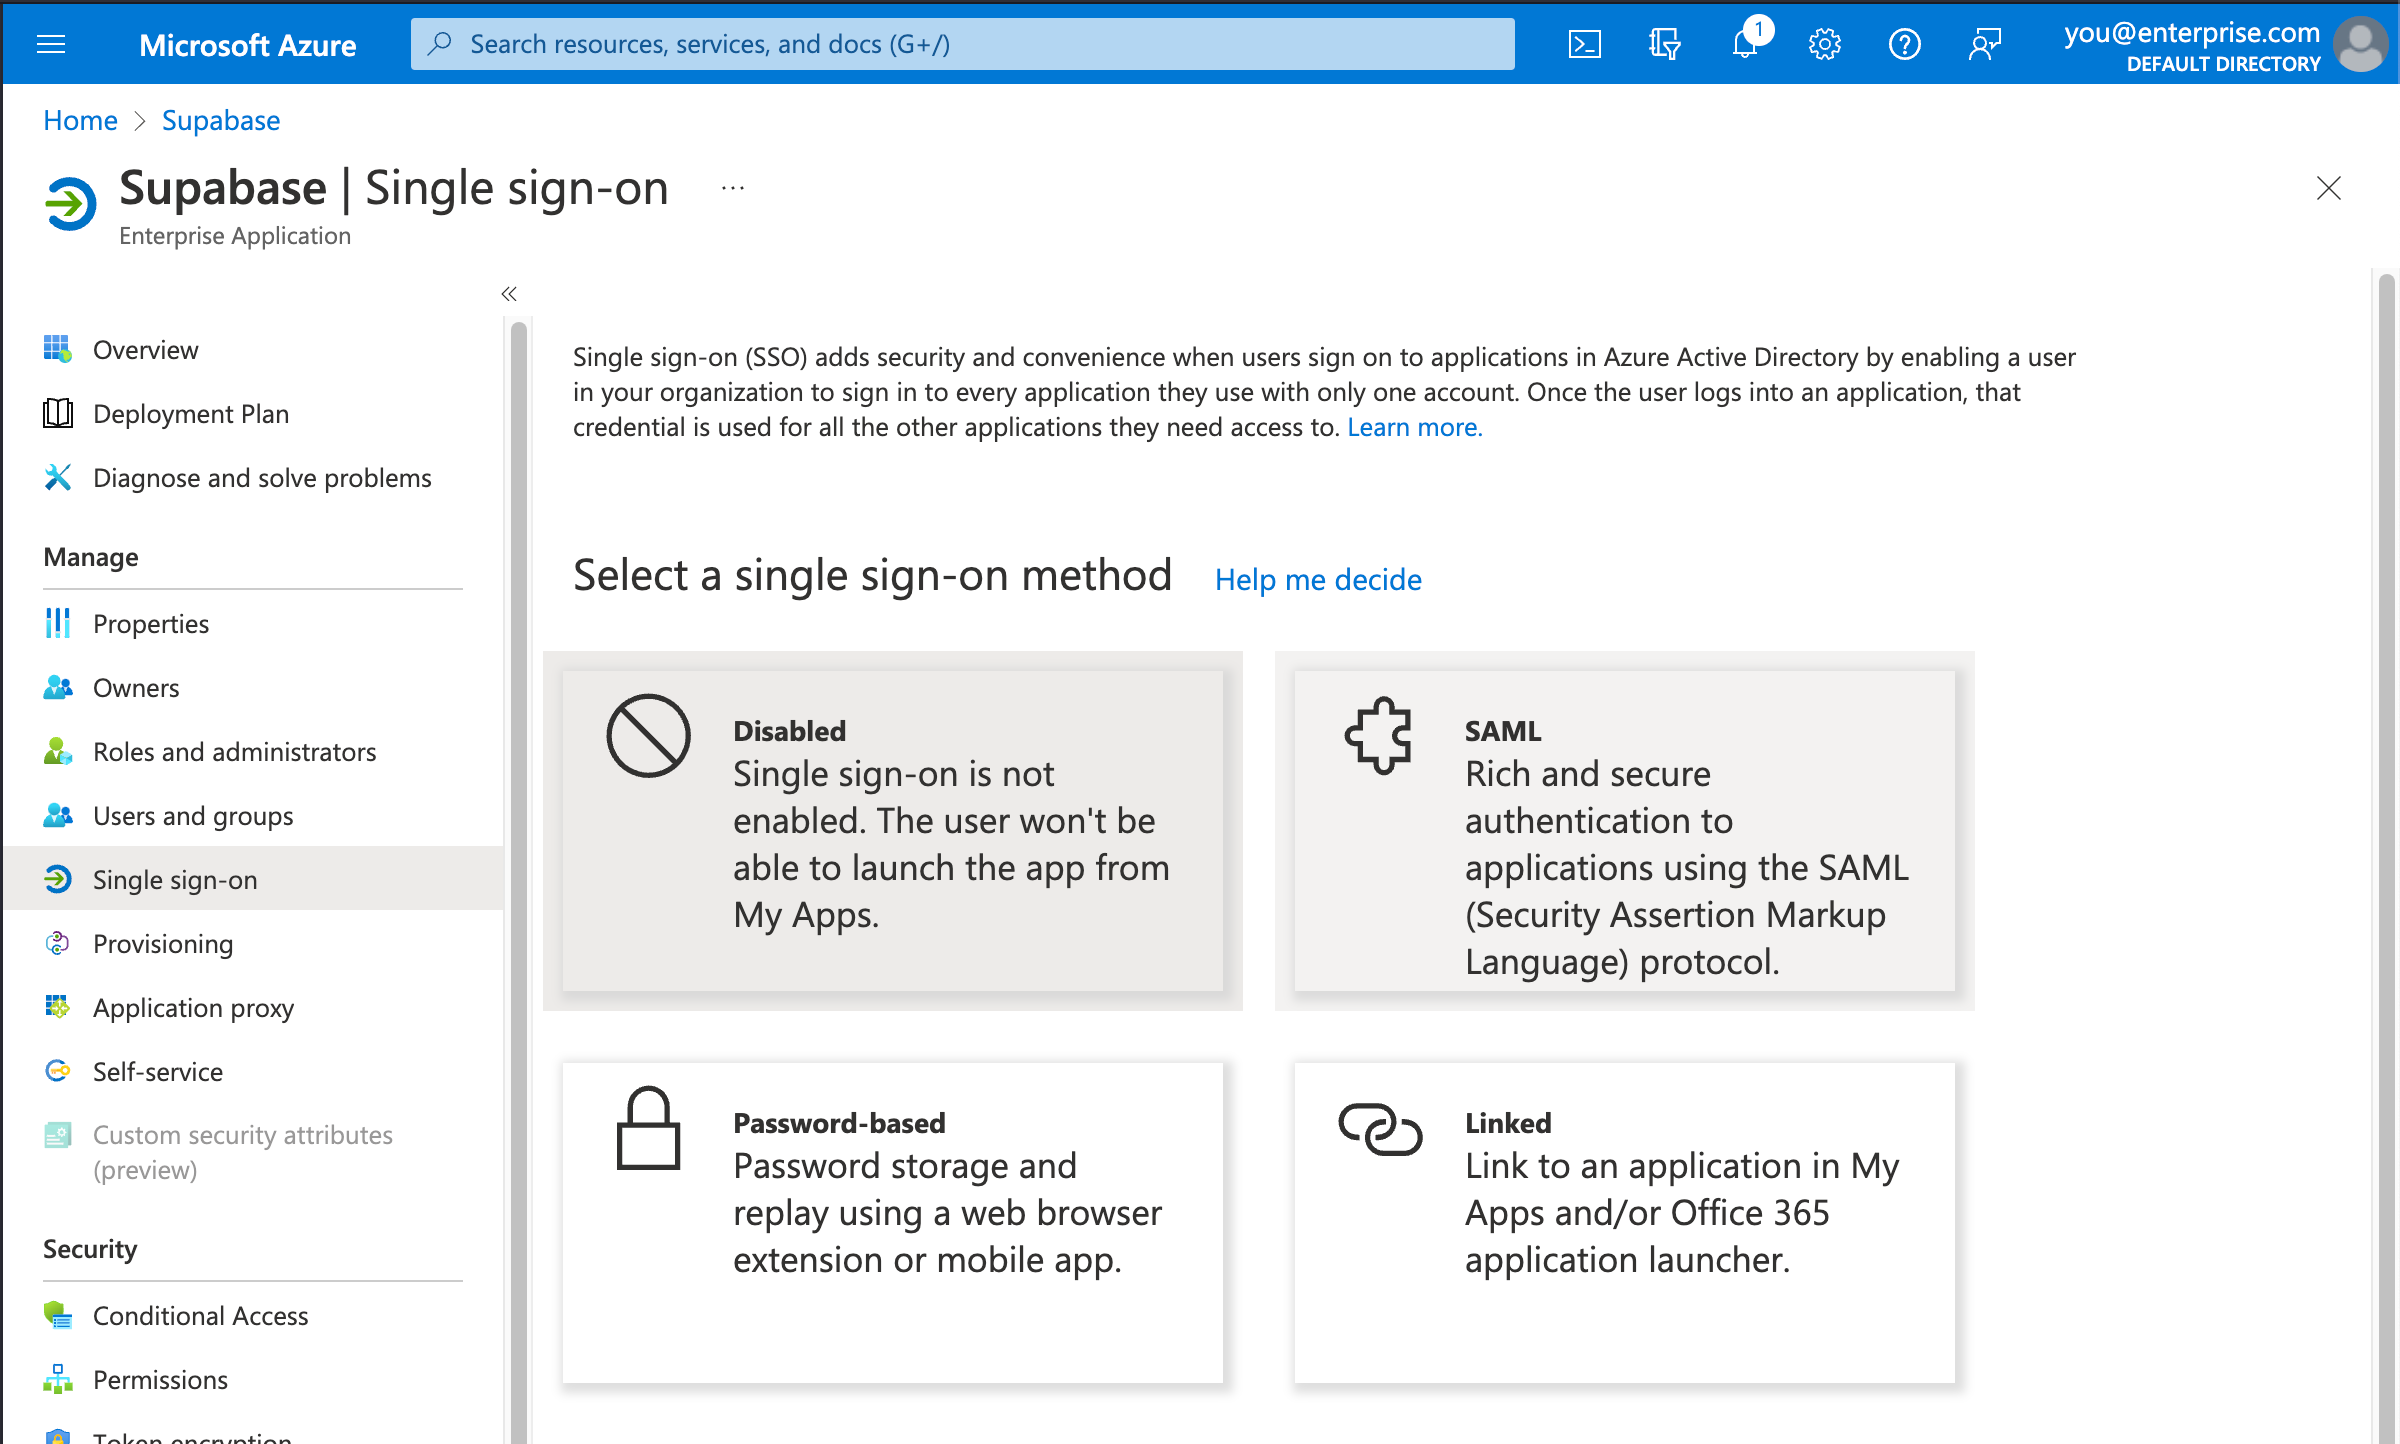 Azure AD console: Supabase application, Single sign-on configuration screen,
selected SAML